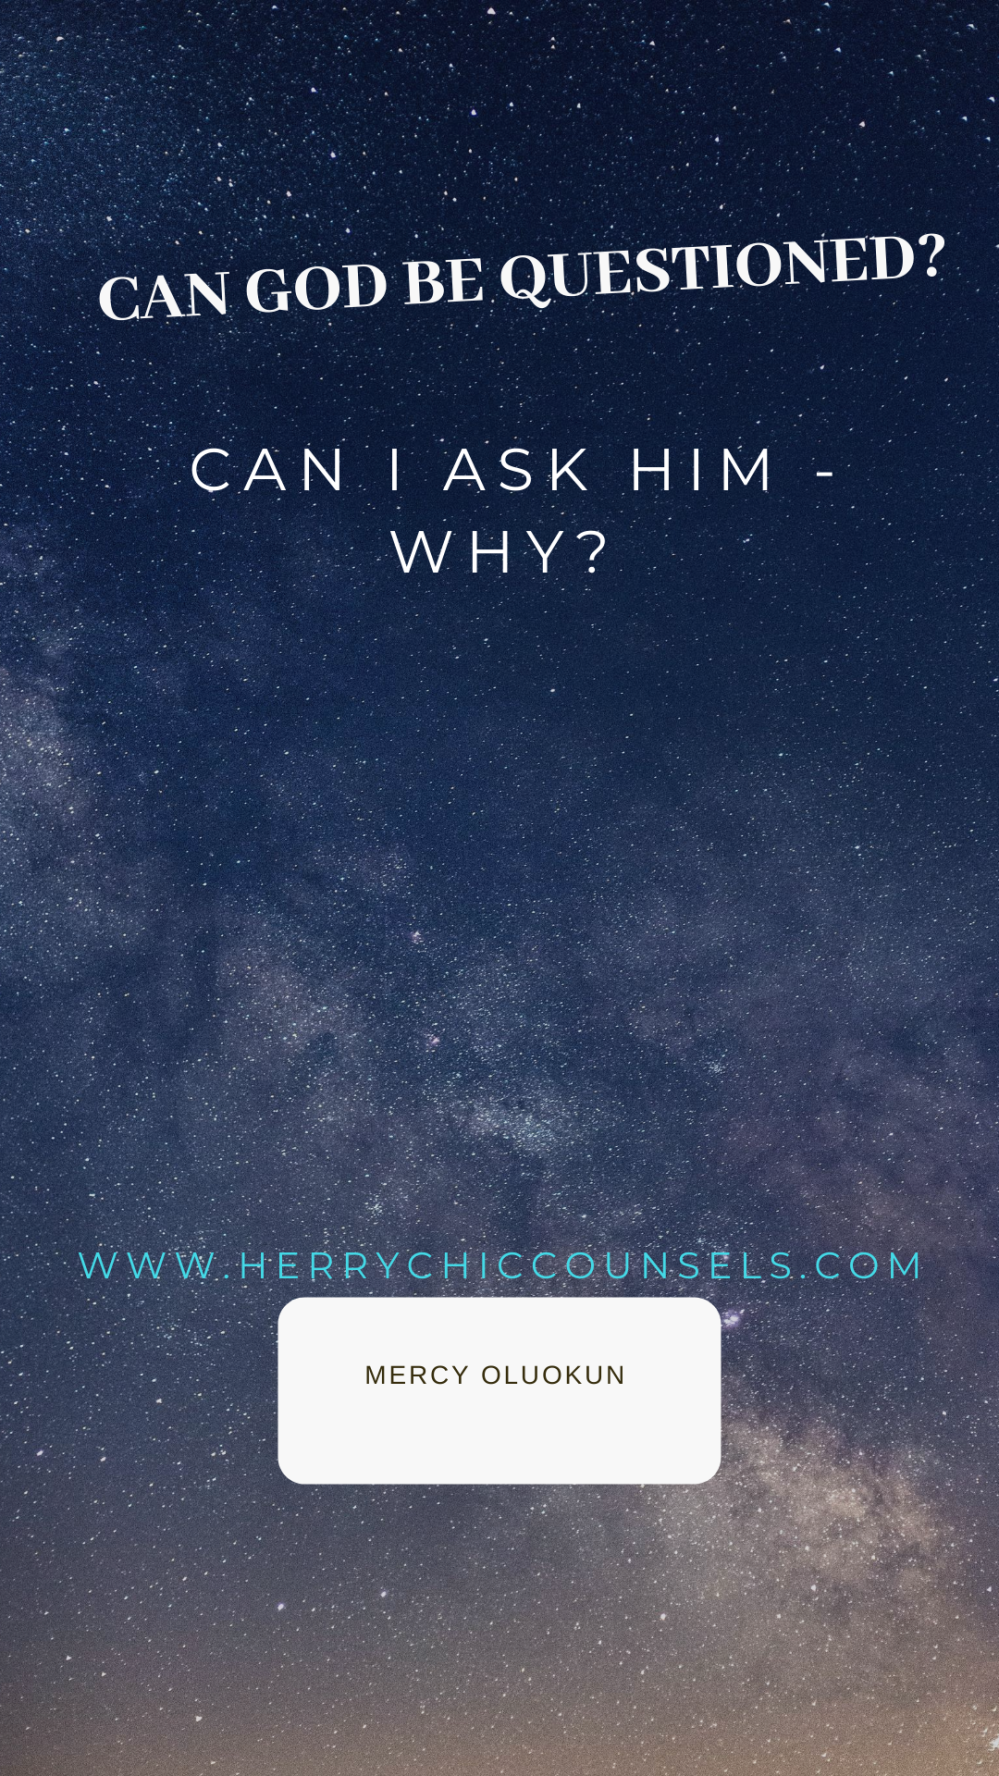 Can I ask God why? - Questioning God